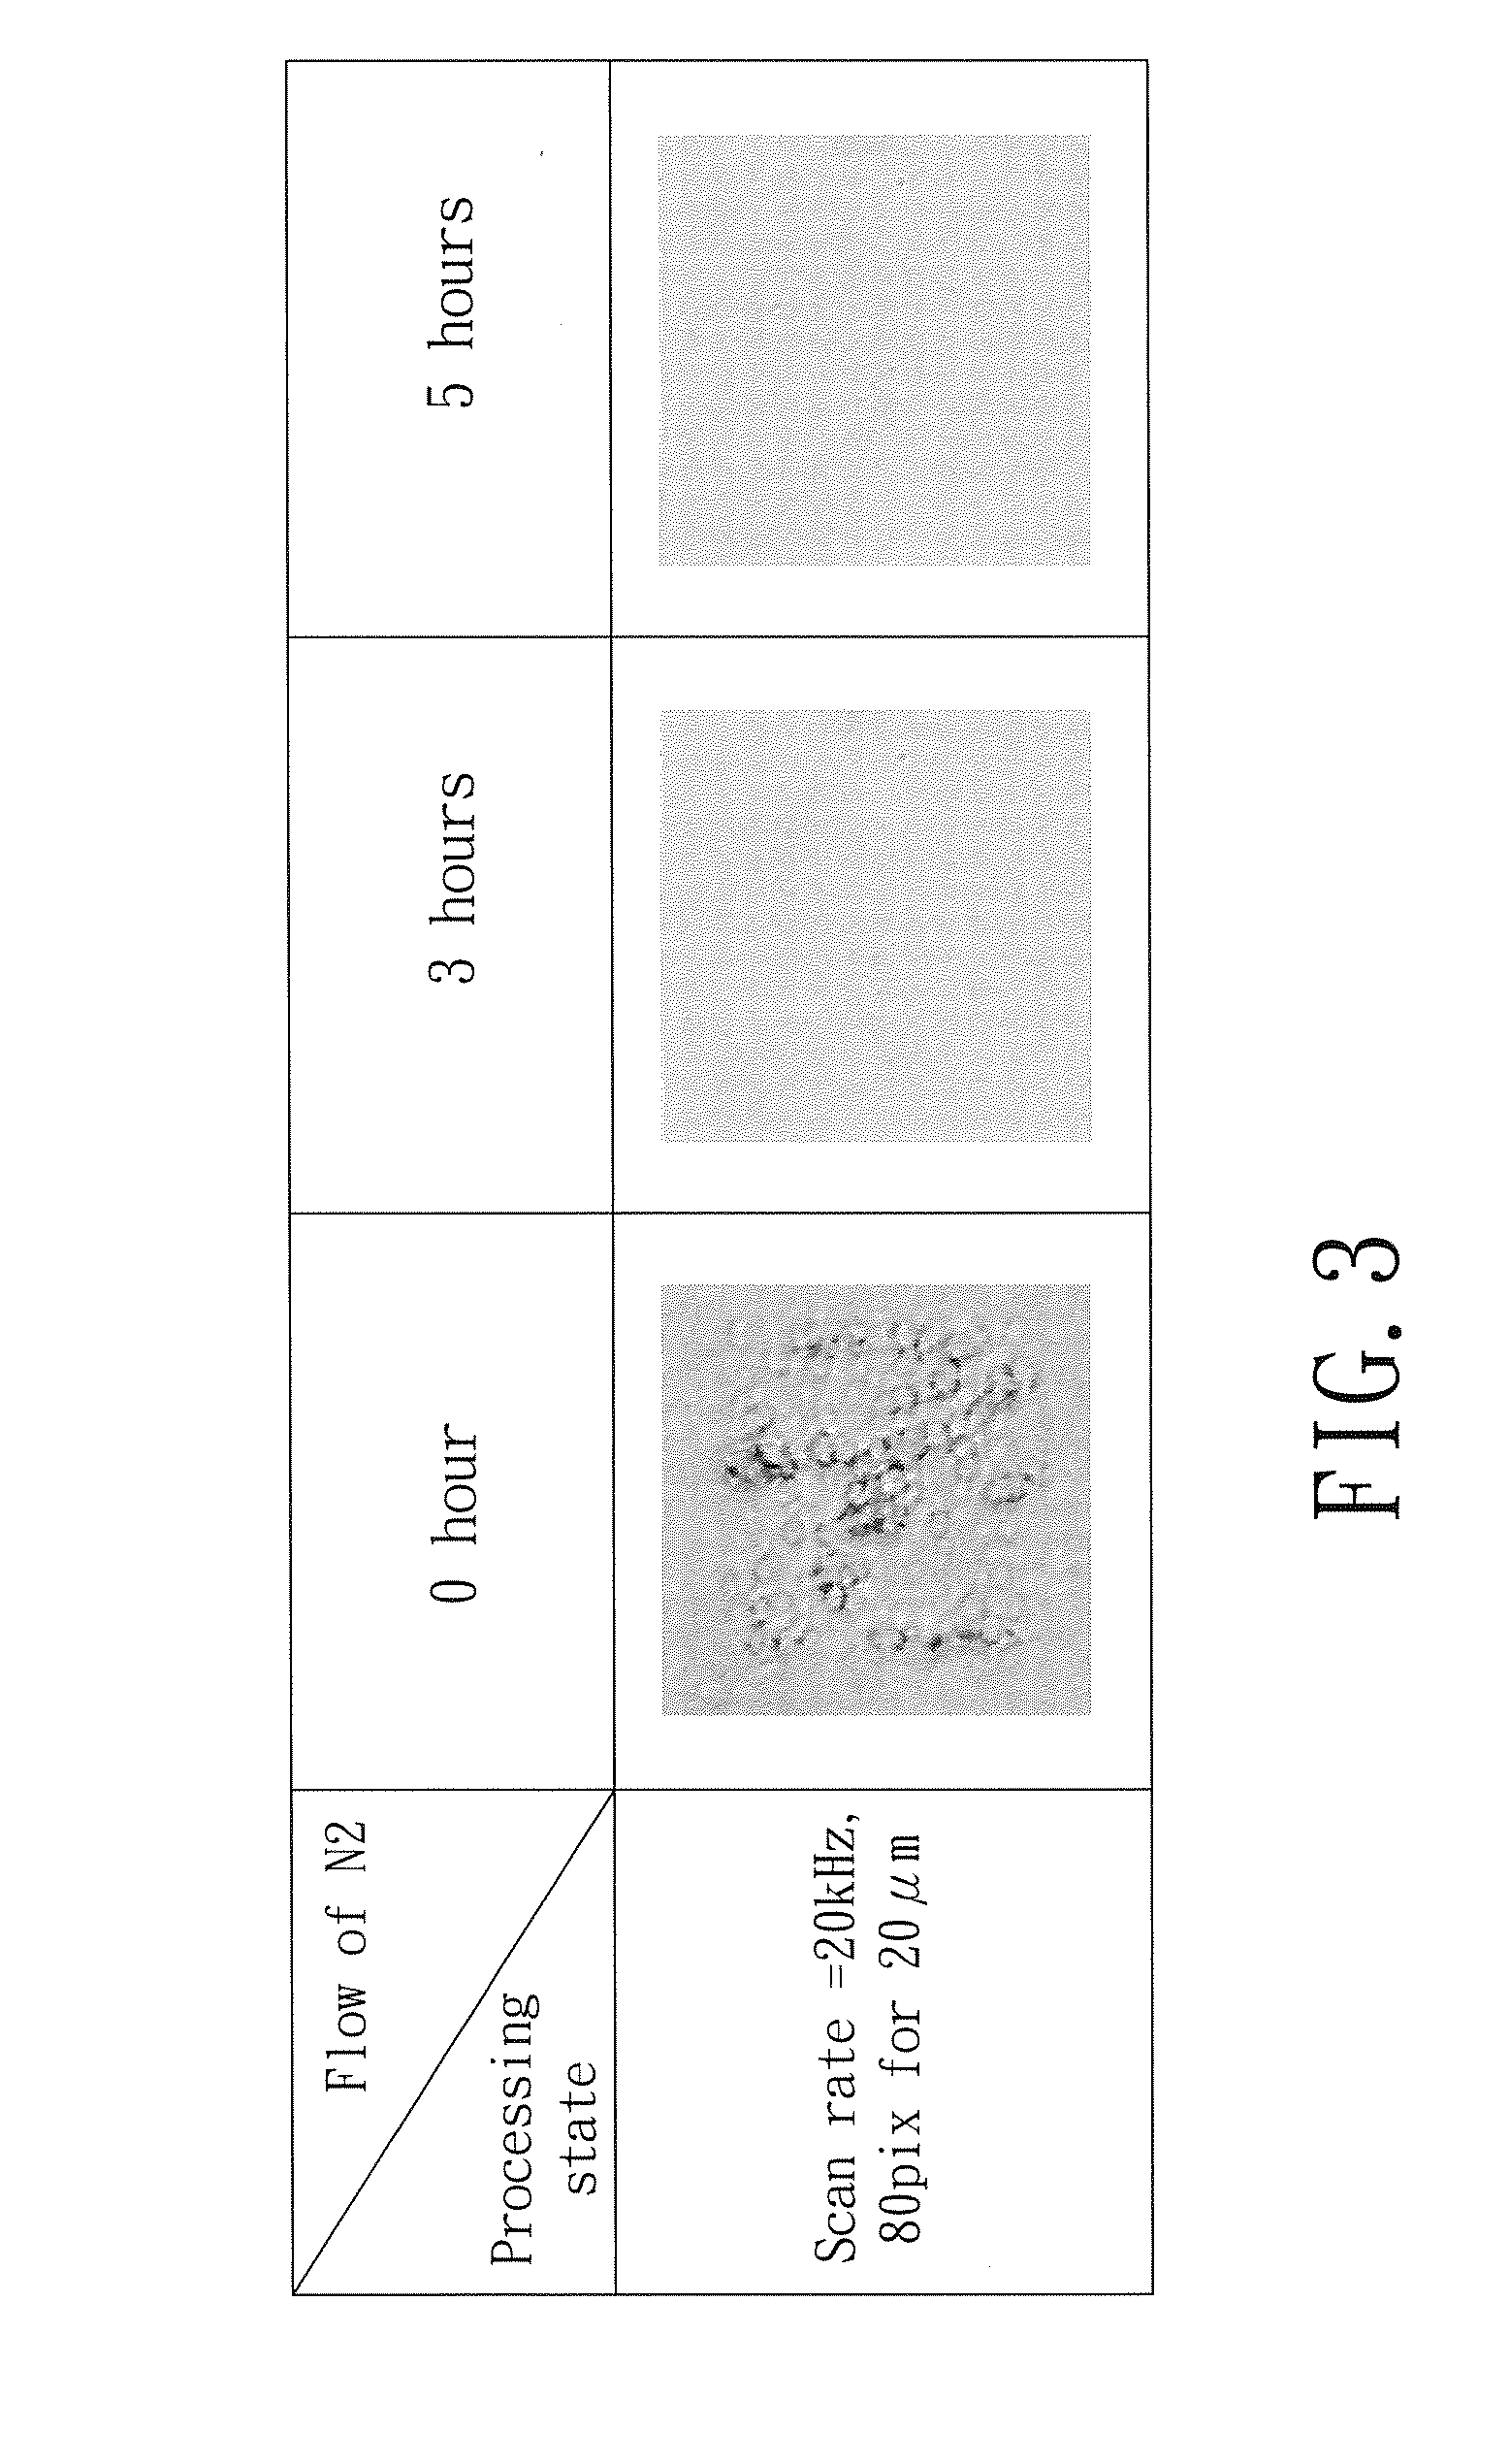 Three-dimensional graphene oxide microstructure and method for making the same